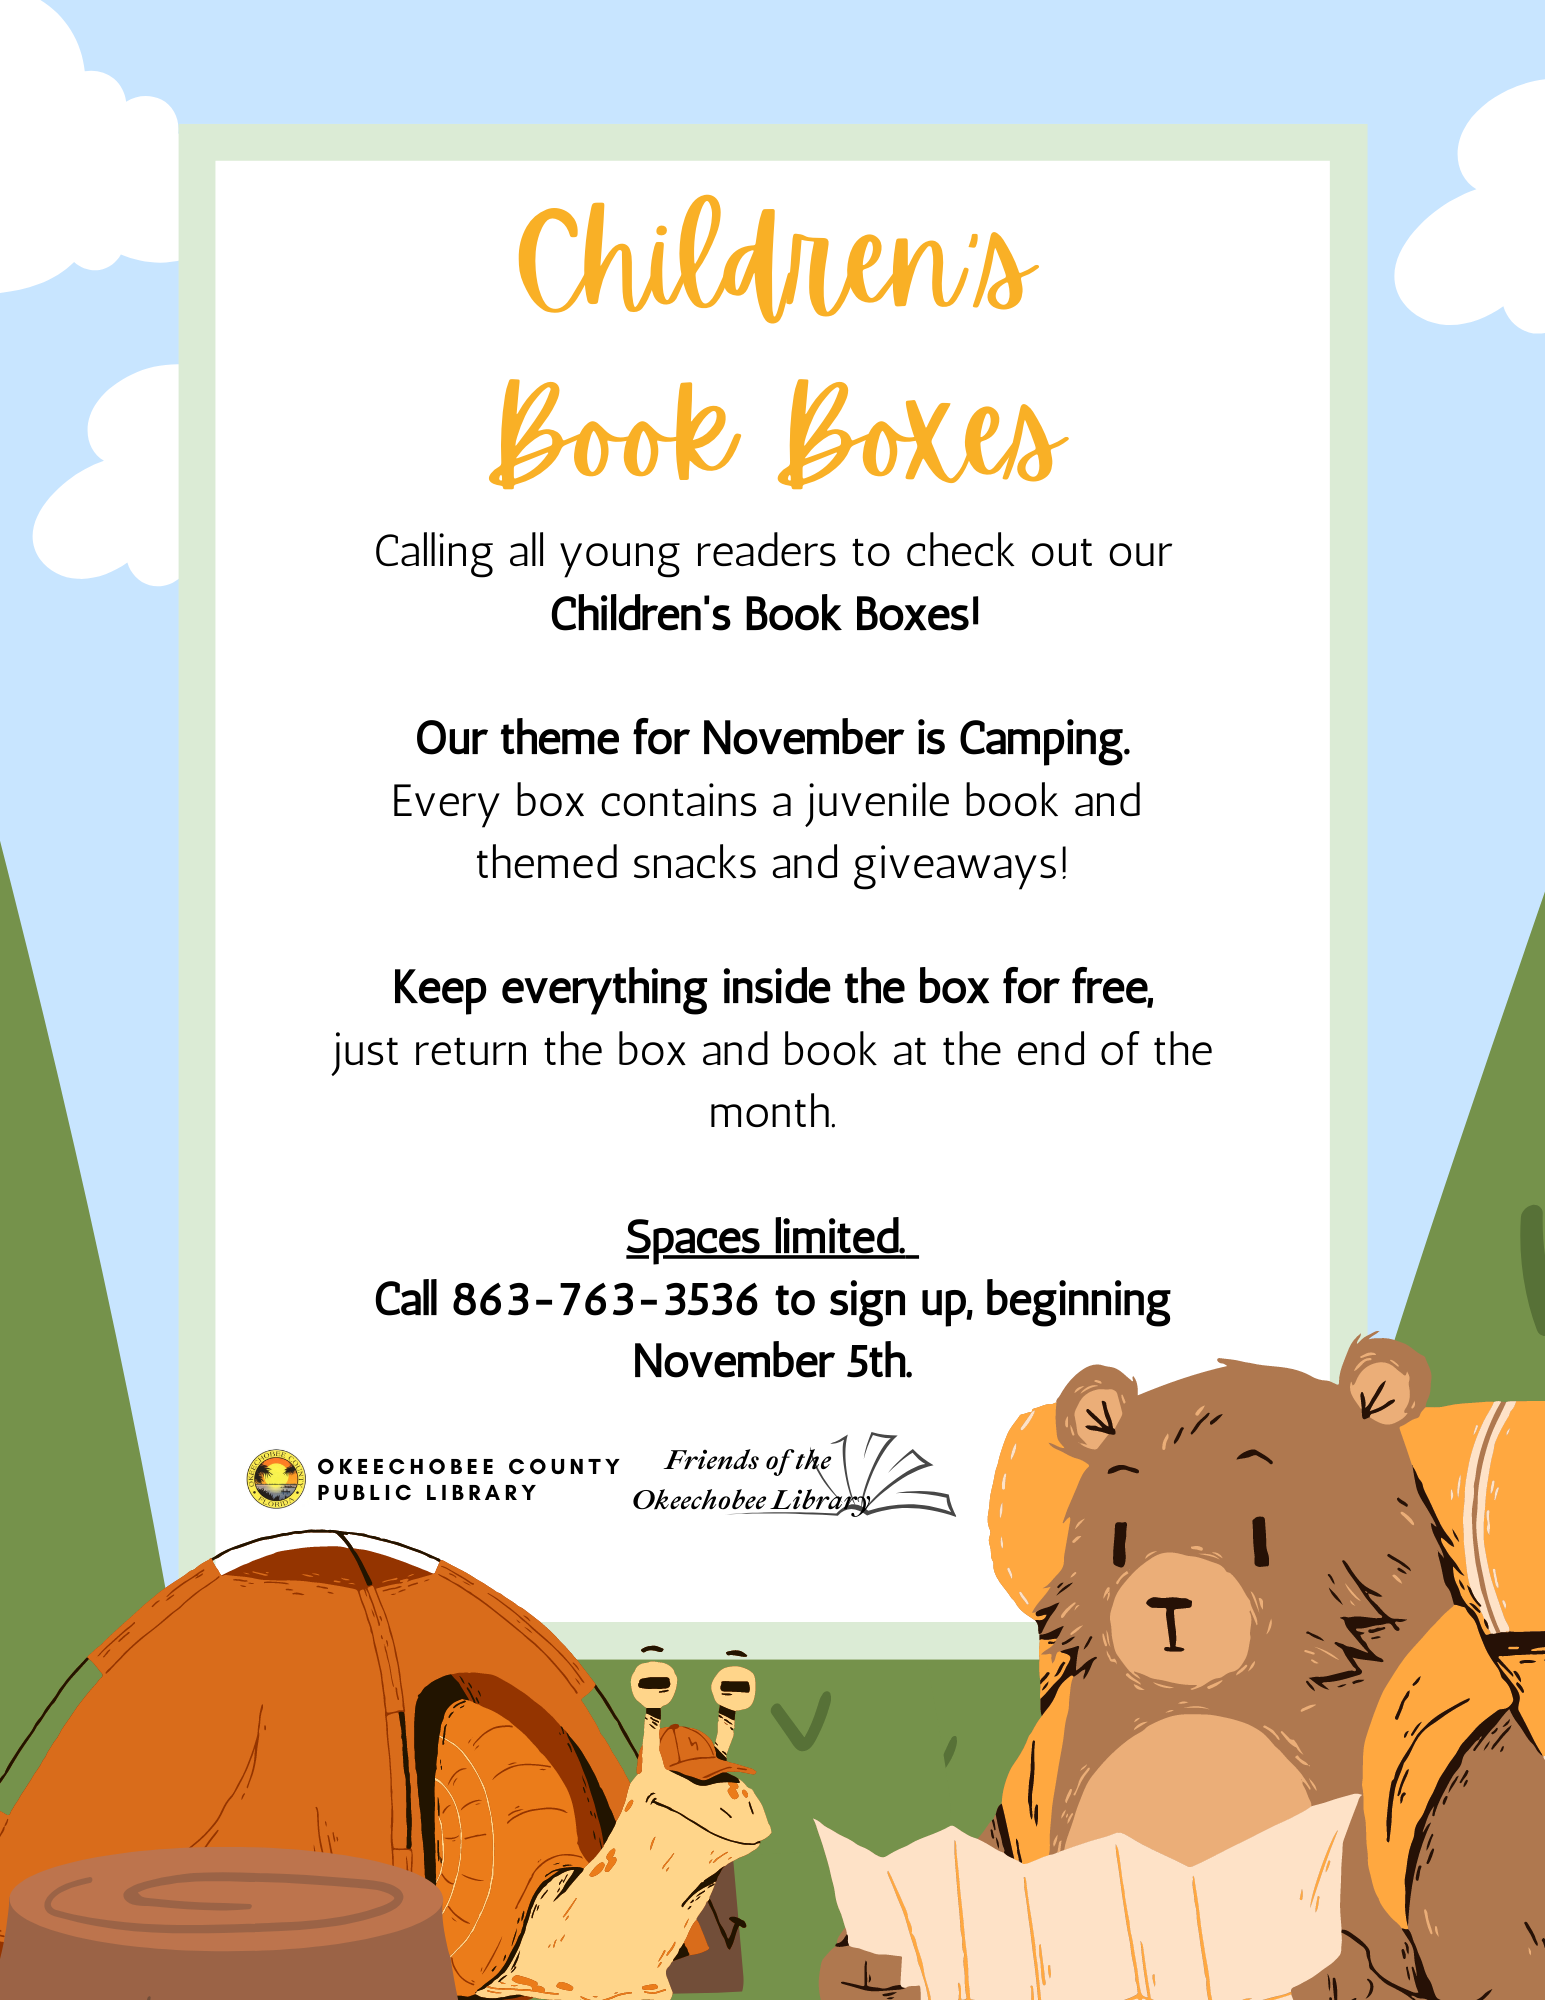 "November Children's Book Boxes! November's theme is camping! Every box contains a juvenile book and themed snacks and giveaways!"